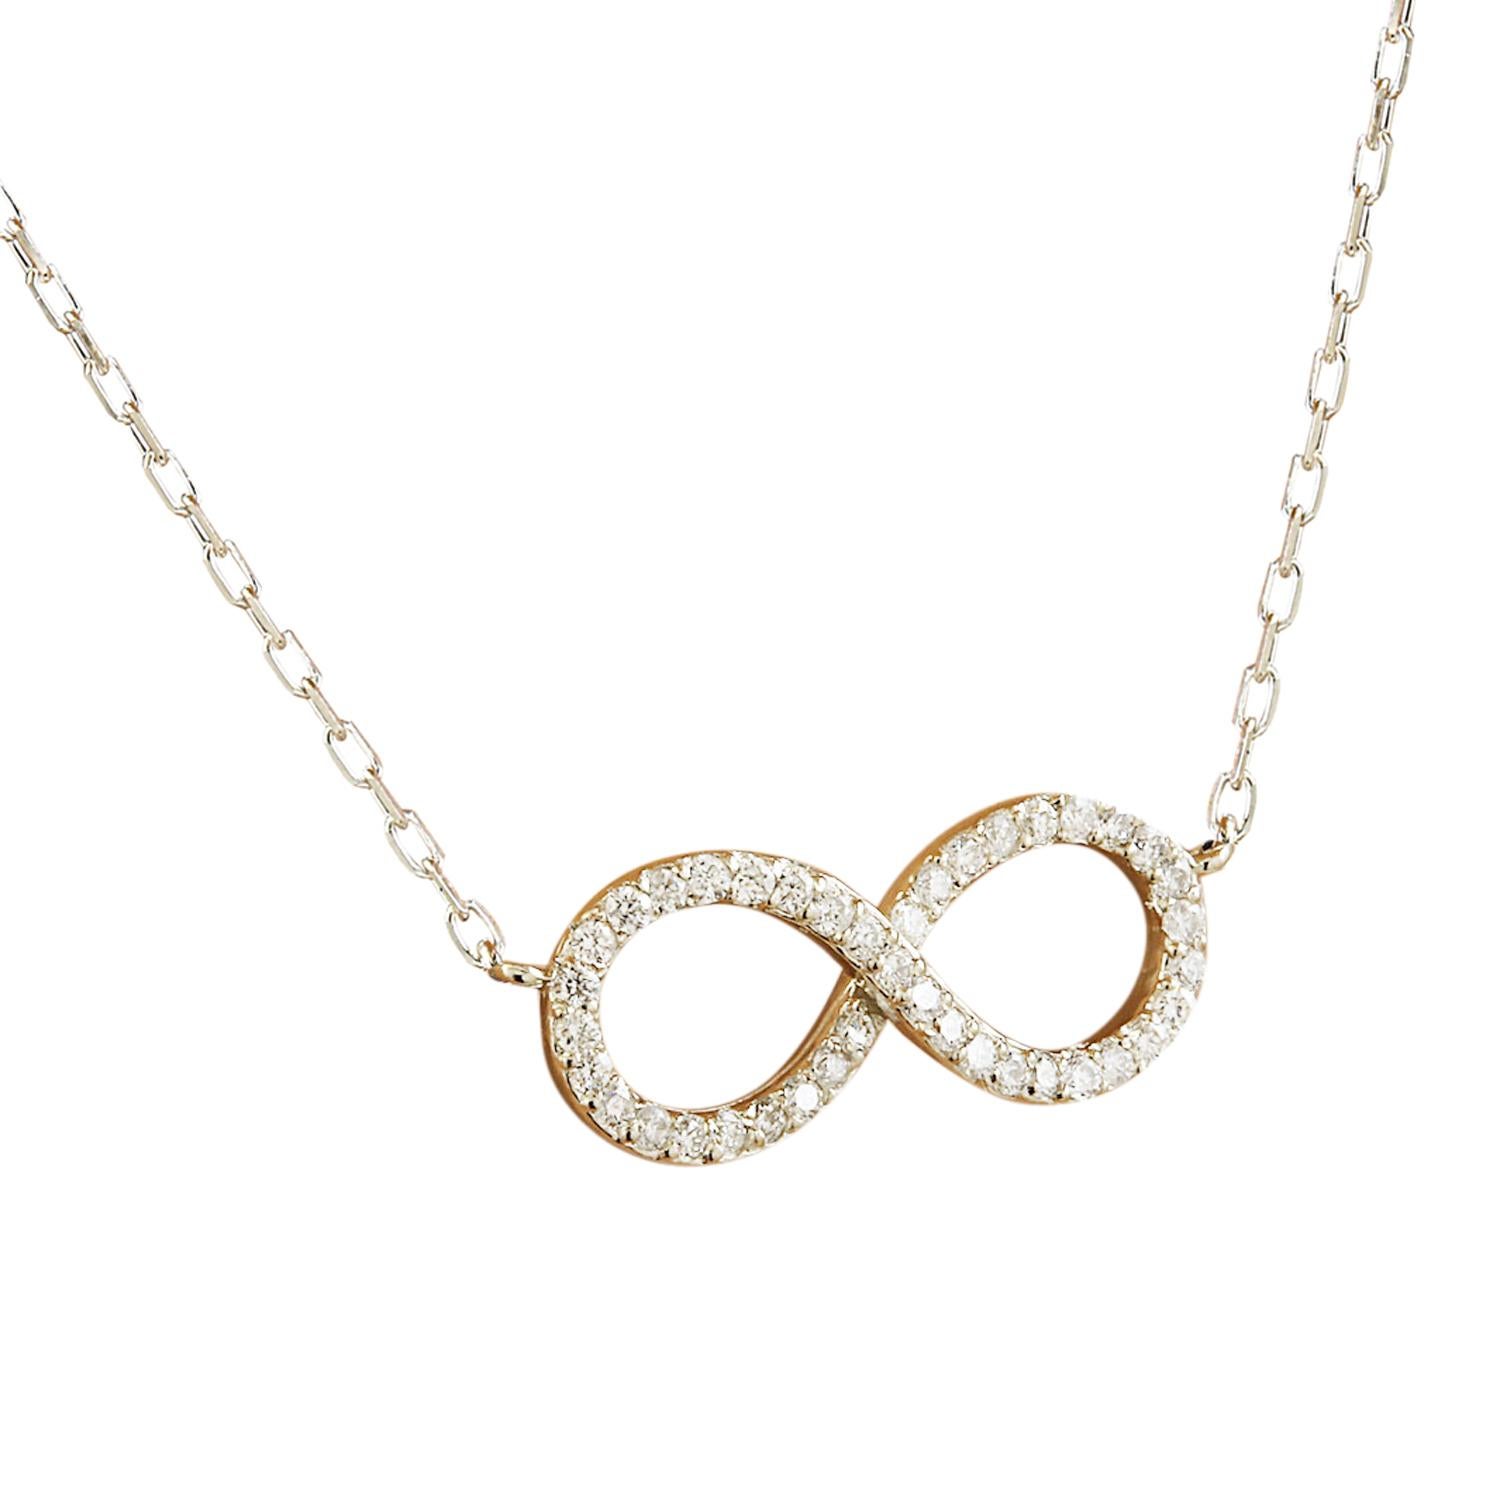 Introducing our stunning 0.30 Carat Natural Diamond Infinity Necklace in 14 Karat White Gold. Stamped with 14K authenticity, this necklace weighs 2.7 grams and measures 16 inches in length. Adorning the infinity symbol are 40 natural diamonds,